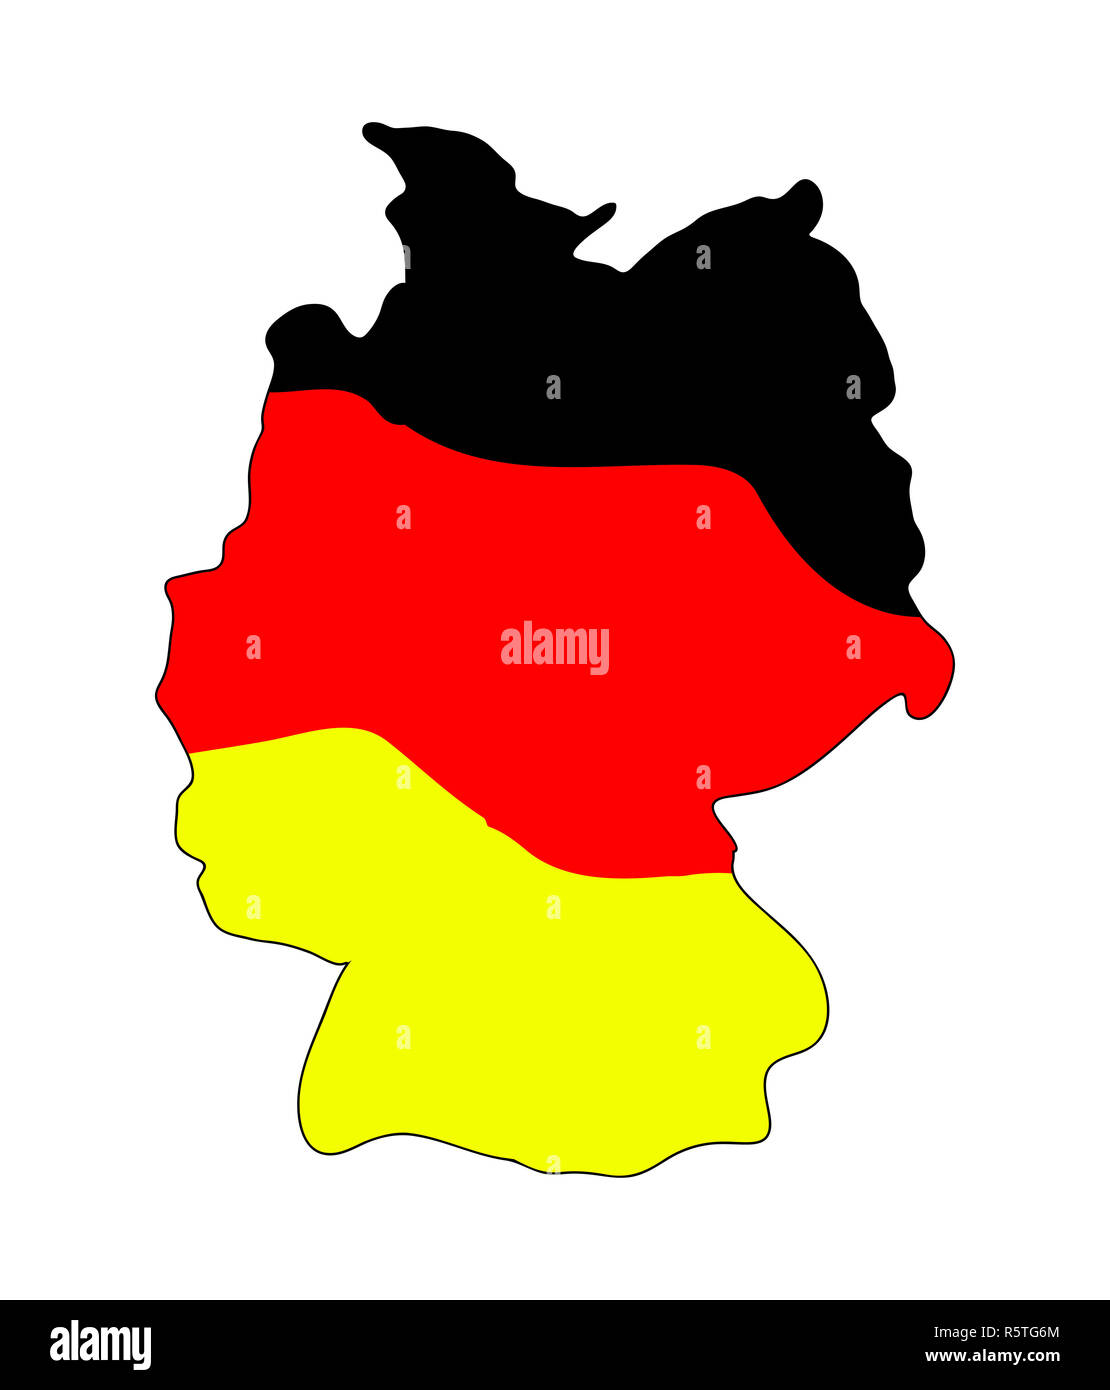 Germany Map Vector Symbol Icon Design German Flag Colors Illustration Isolated On White Background Stock Photo Alamy